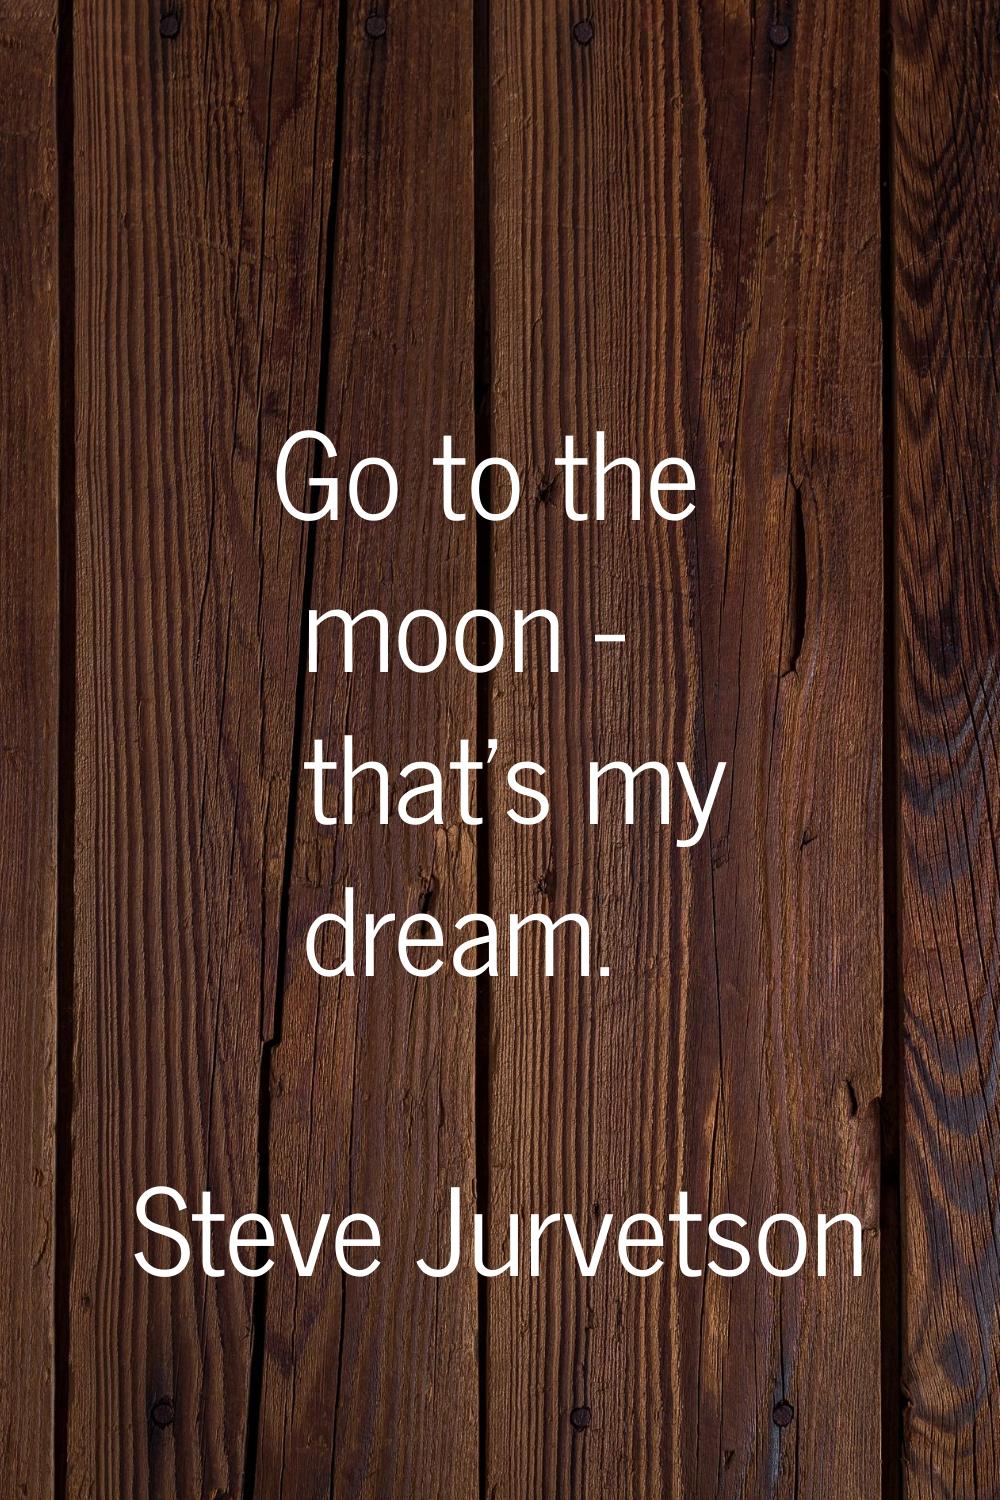 Go to the moon - that's my dream.